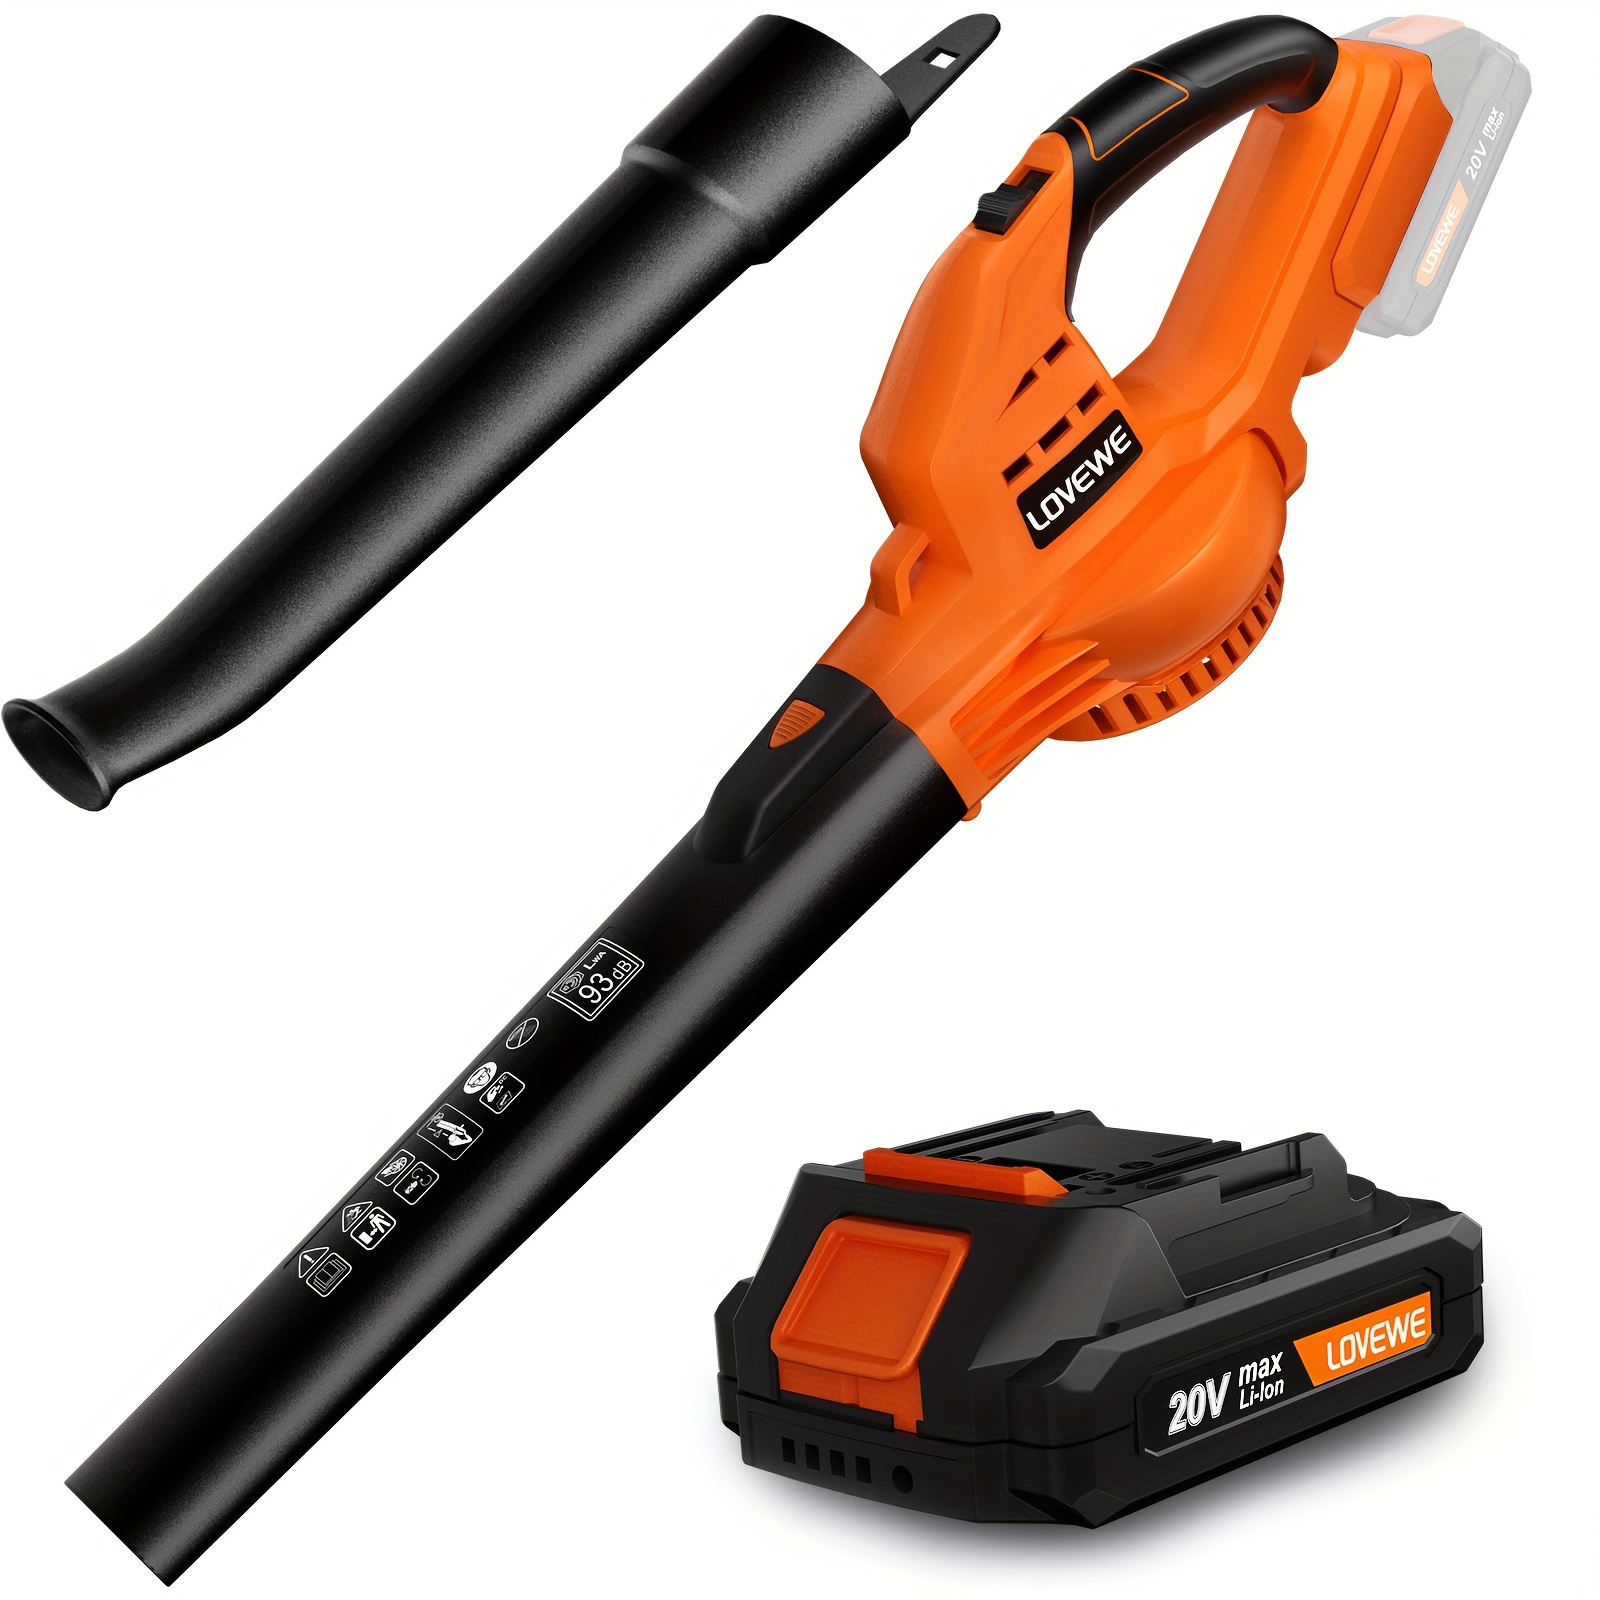 

Lovewe Cordless Leaf Blower, 150mph Handheld Electric Leaf Blowers With 2.0ah Battery & Fast Charger, 2 Speed Mode, 20v Battery Powered Leaf Blowers For Cleaning Patio, Yard, Sidewalk